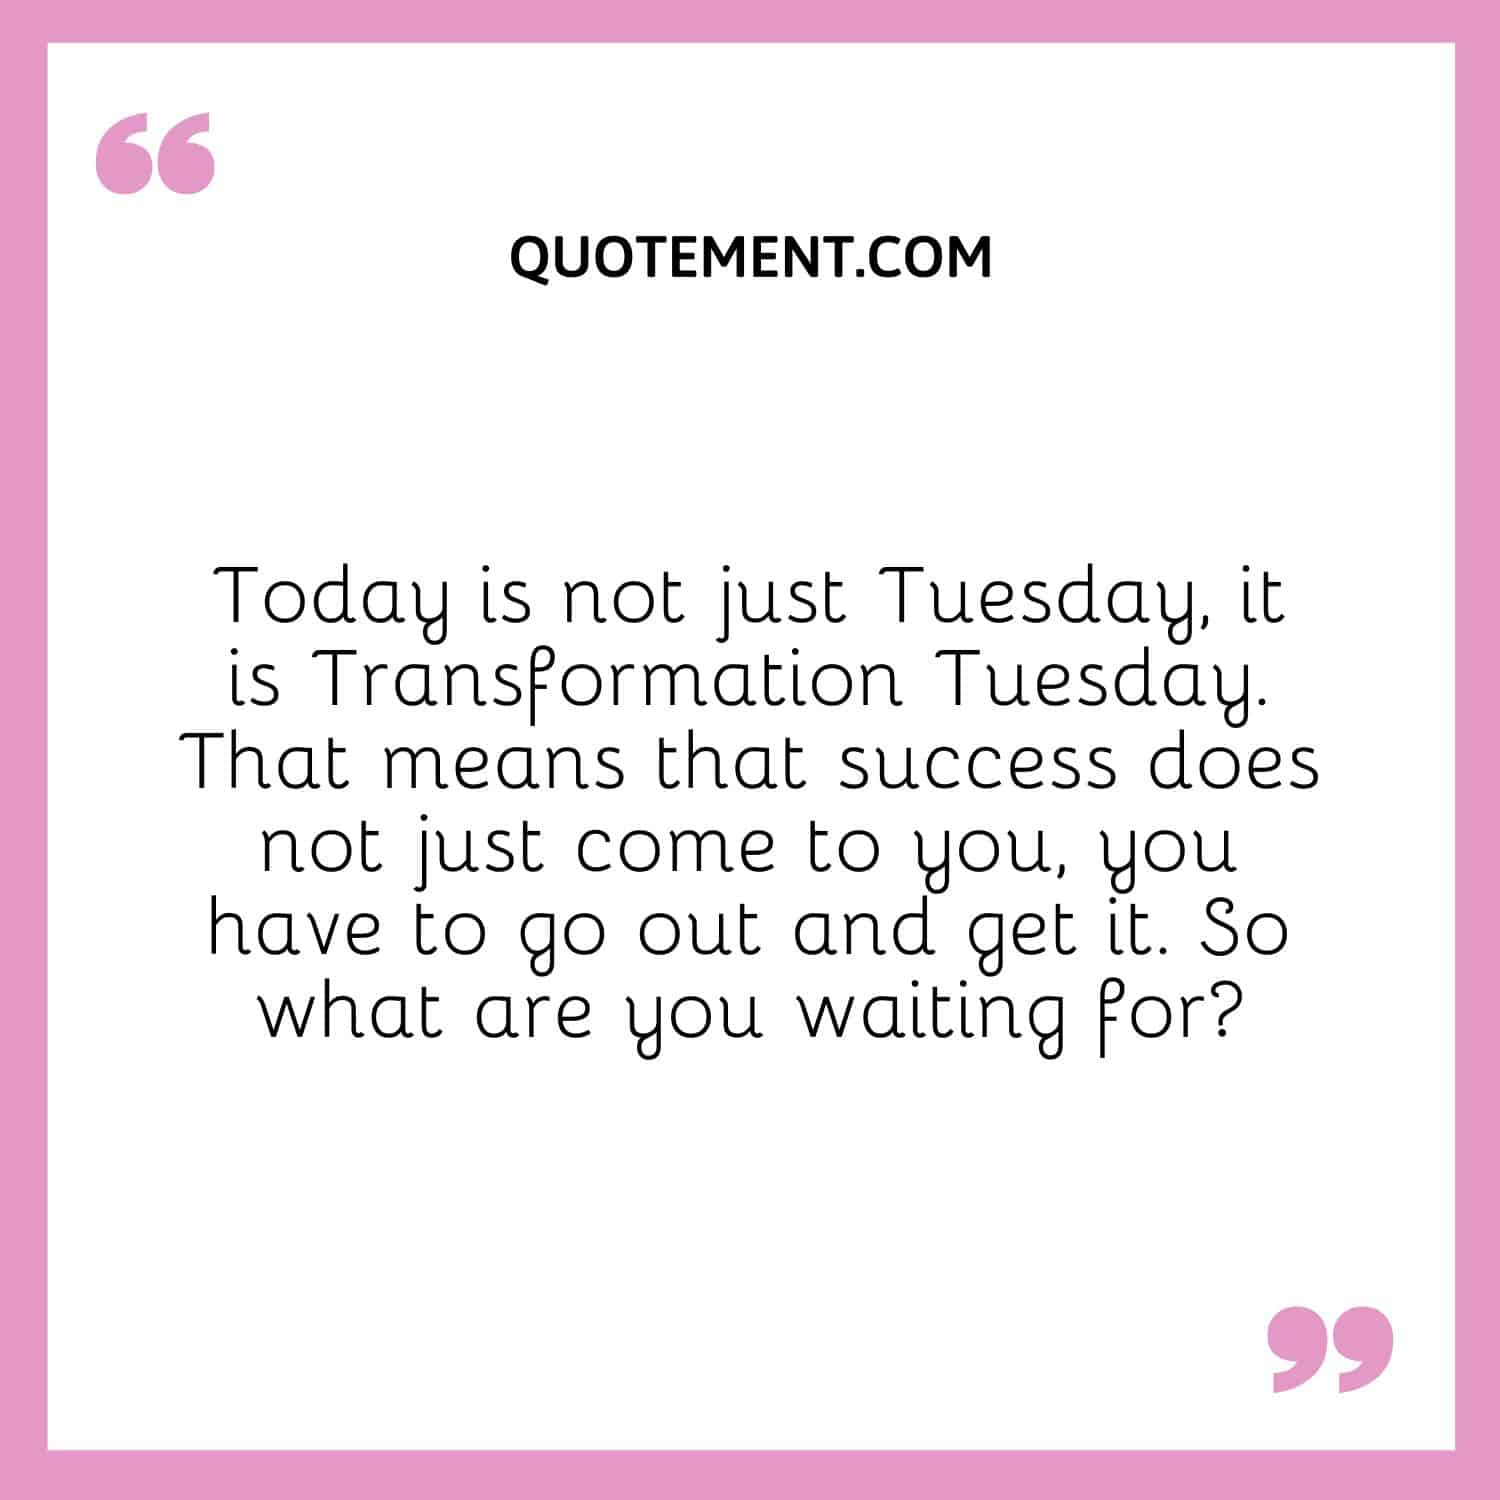 Today is not just Tuesday, it is Transformation Tuesday. That means that success does not just come to you, you have to go out and get it. So what are you waiting for